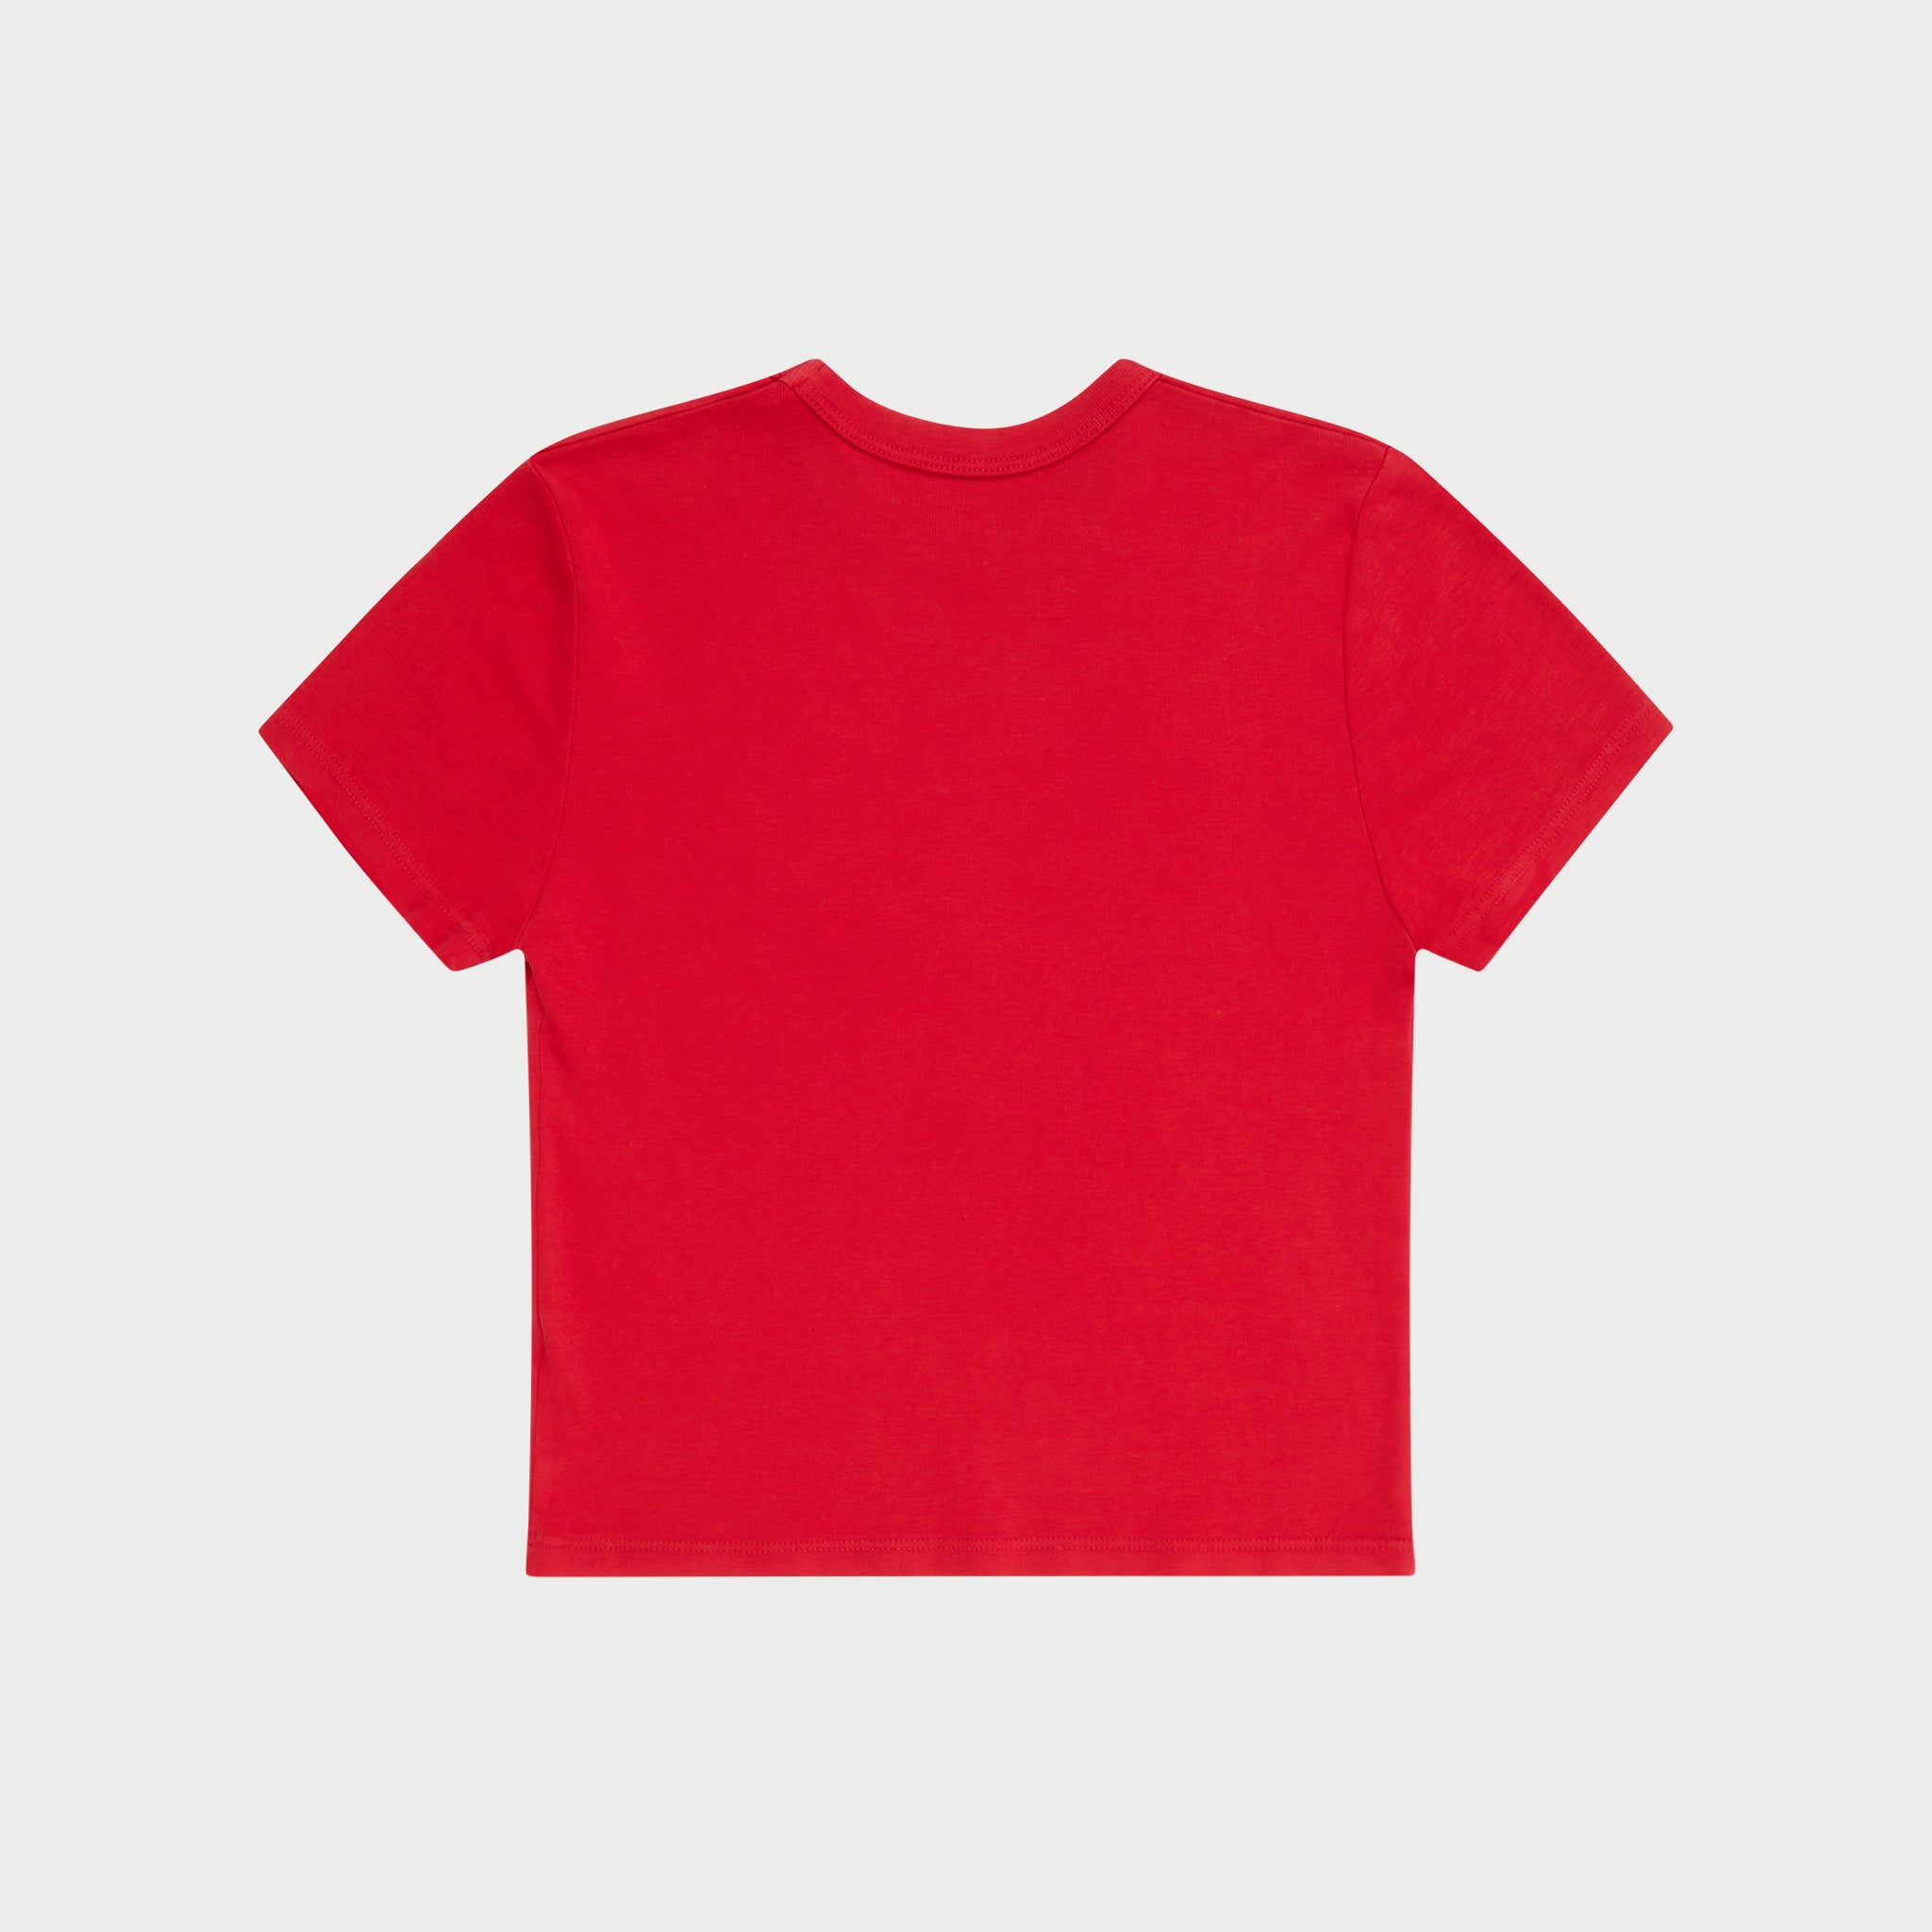 Trophy Baby Tee (Red)